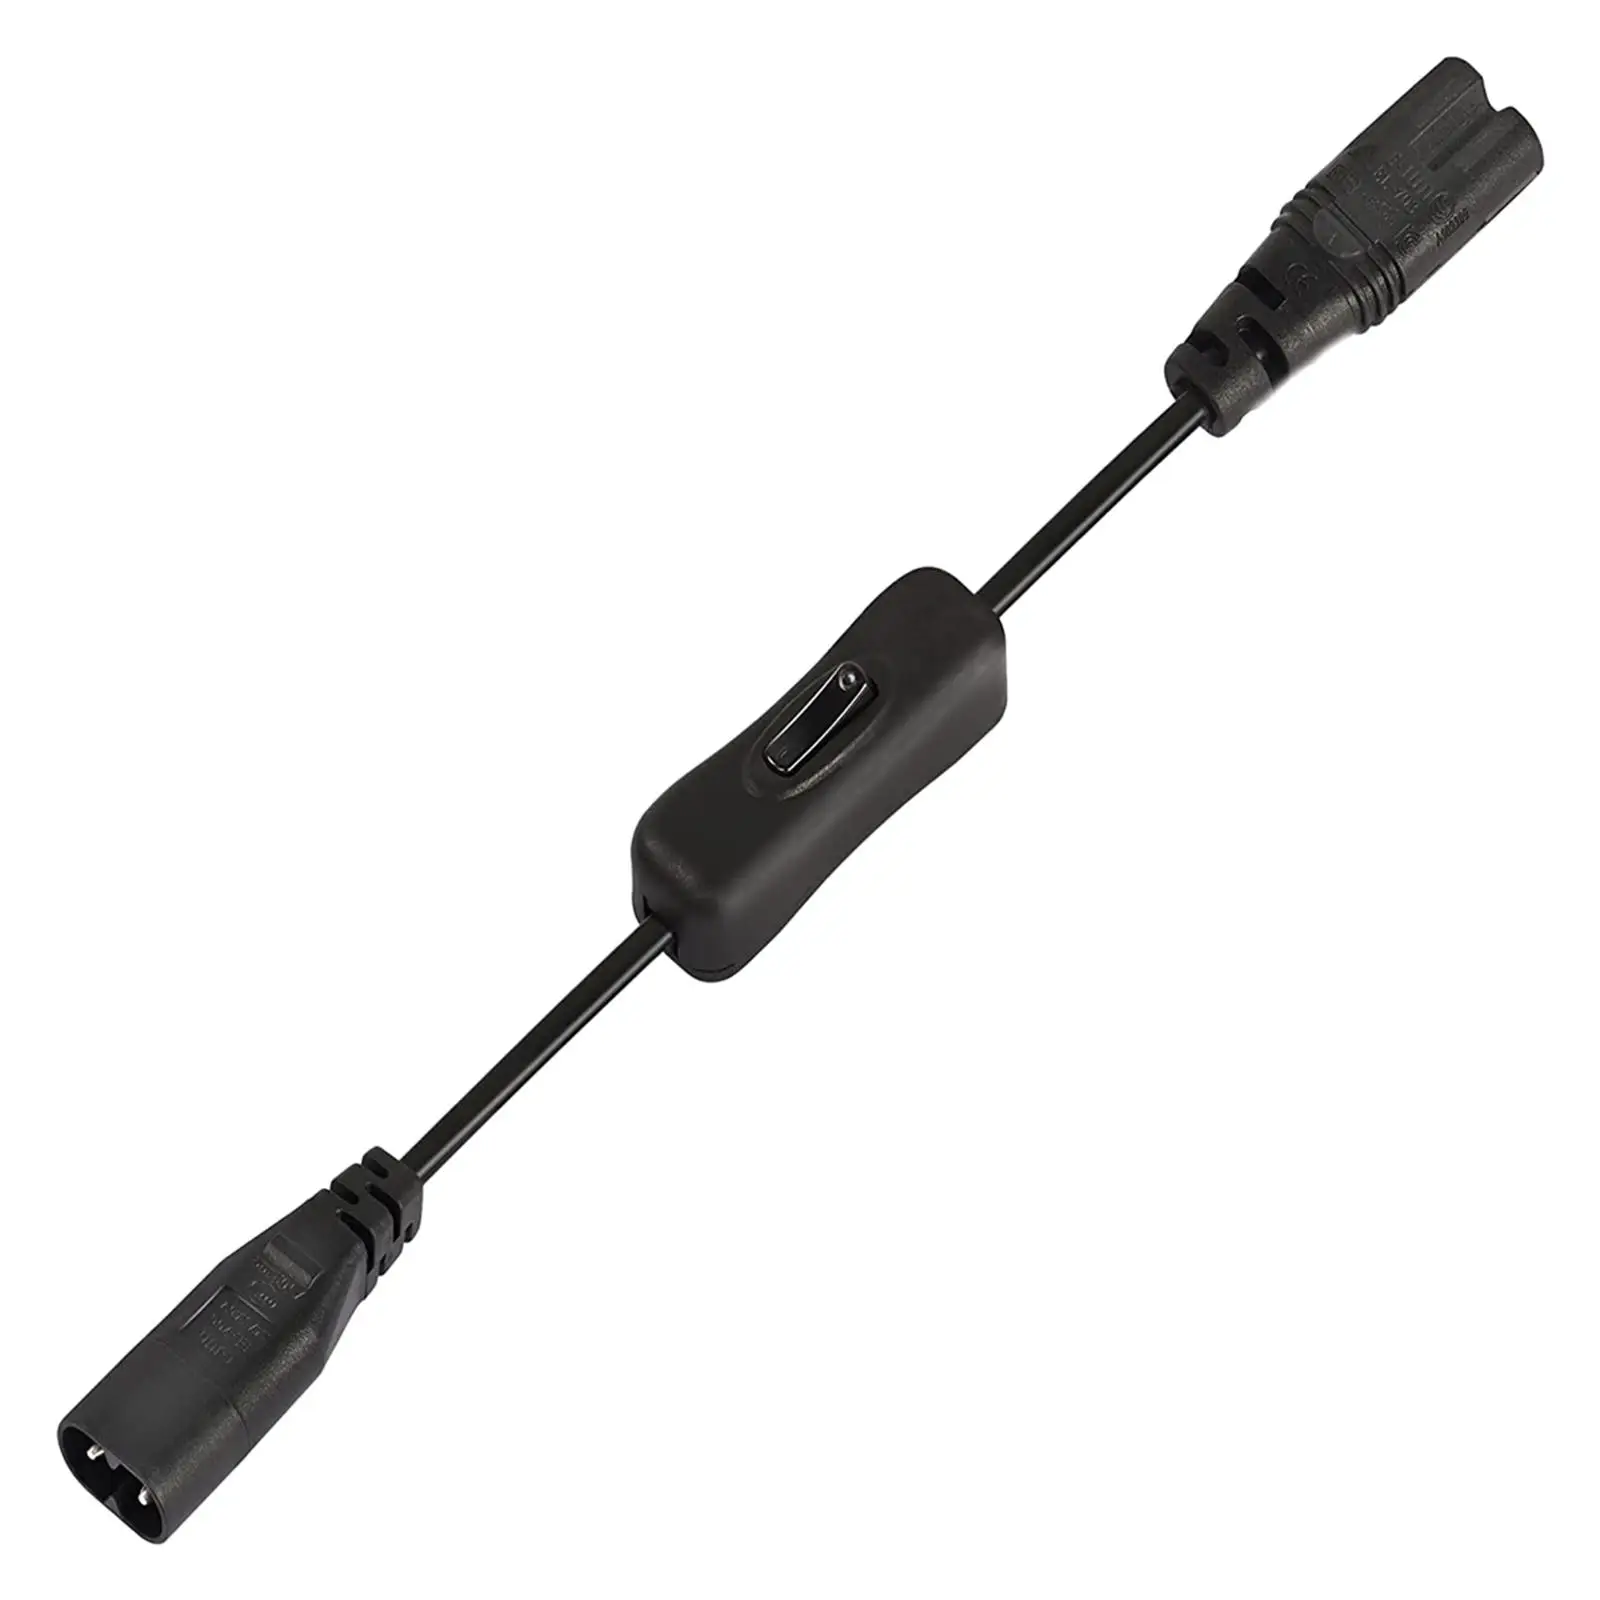 IEC 320 C8 Plug to C7 Power Cable with On/Off Switch 250V 2.5A 30cm Replacement Power Cord Wire for TV Monitor Computer